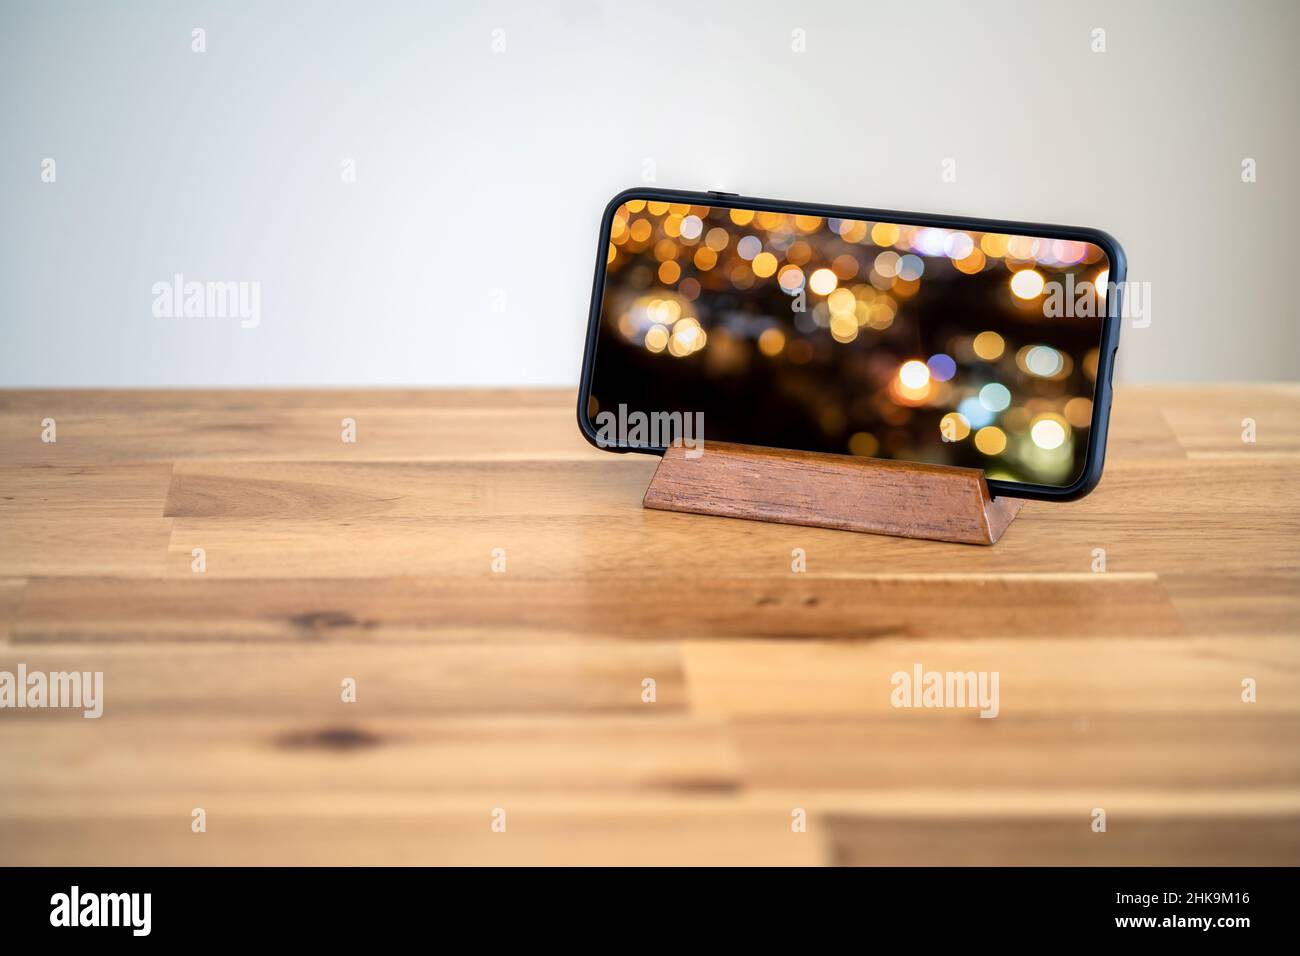 Smartphone standing on the table with scrren mocked up. video watching concept. Stock Photo